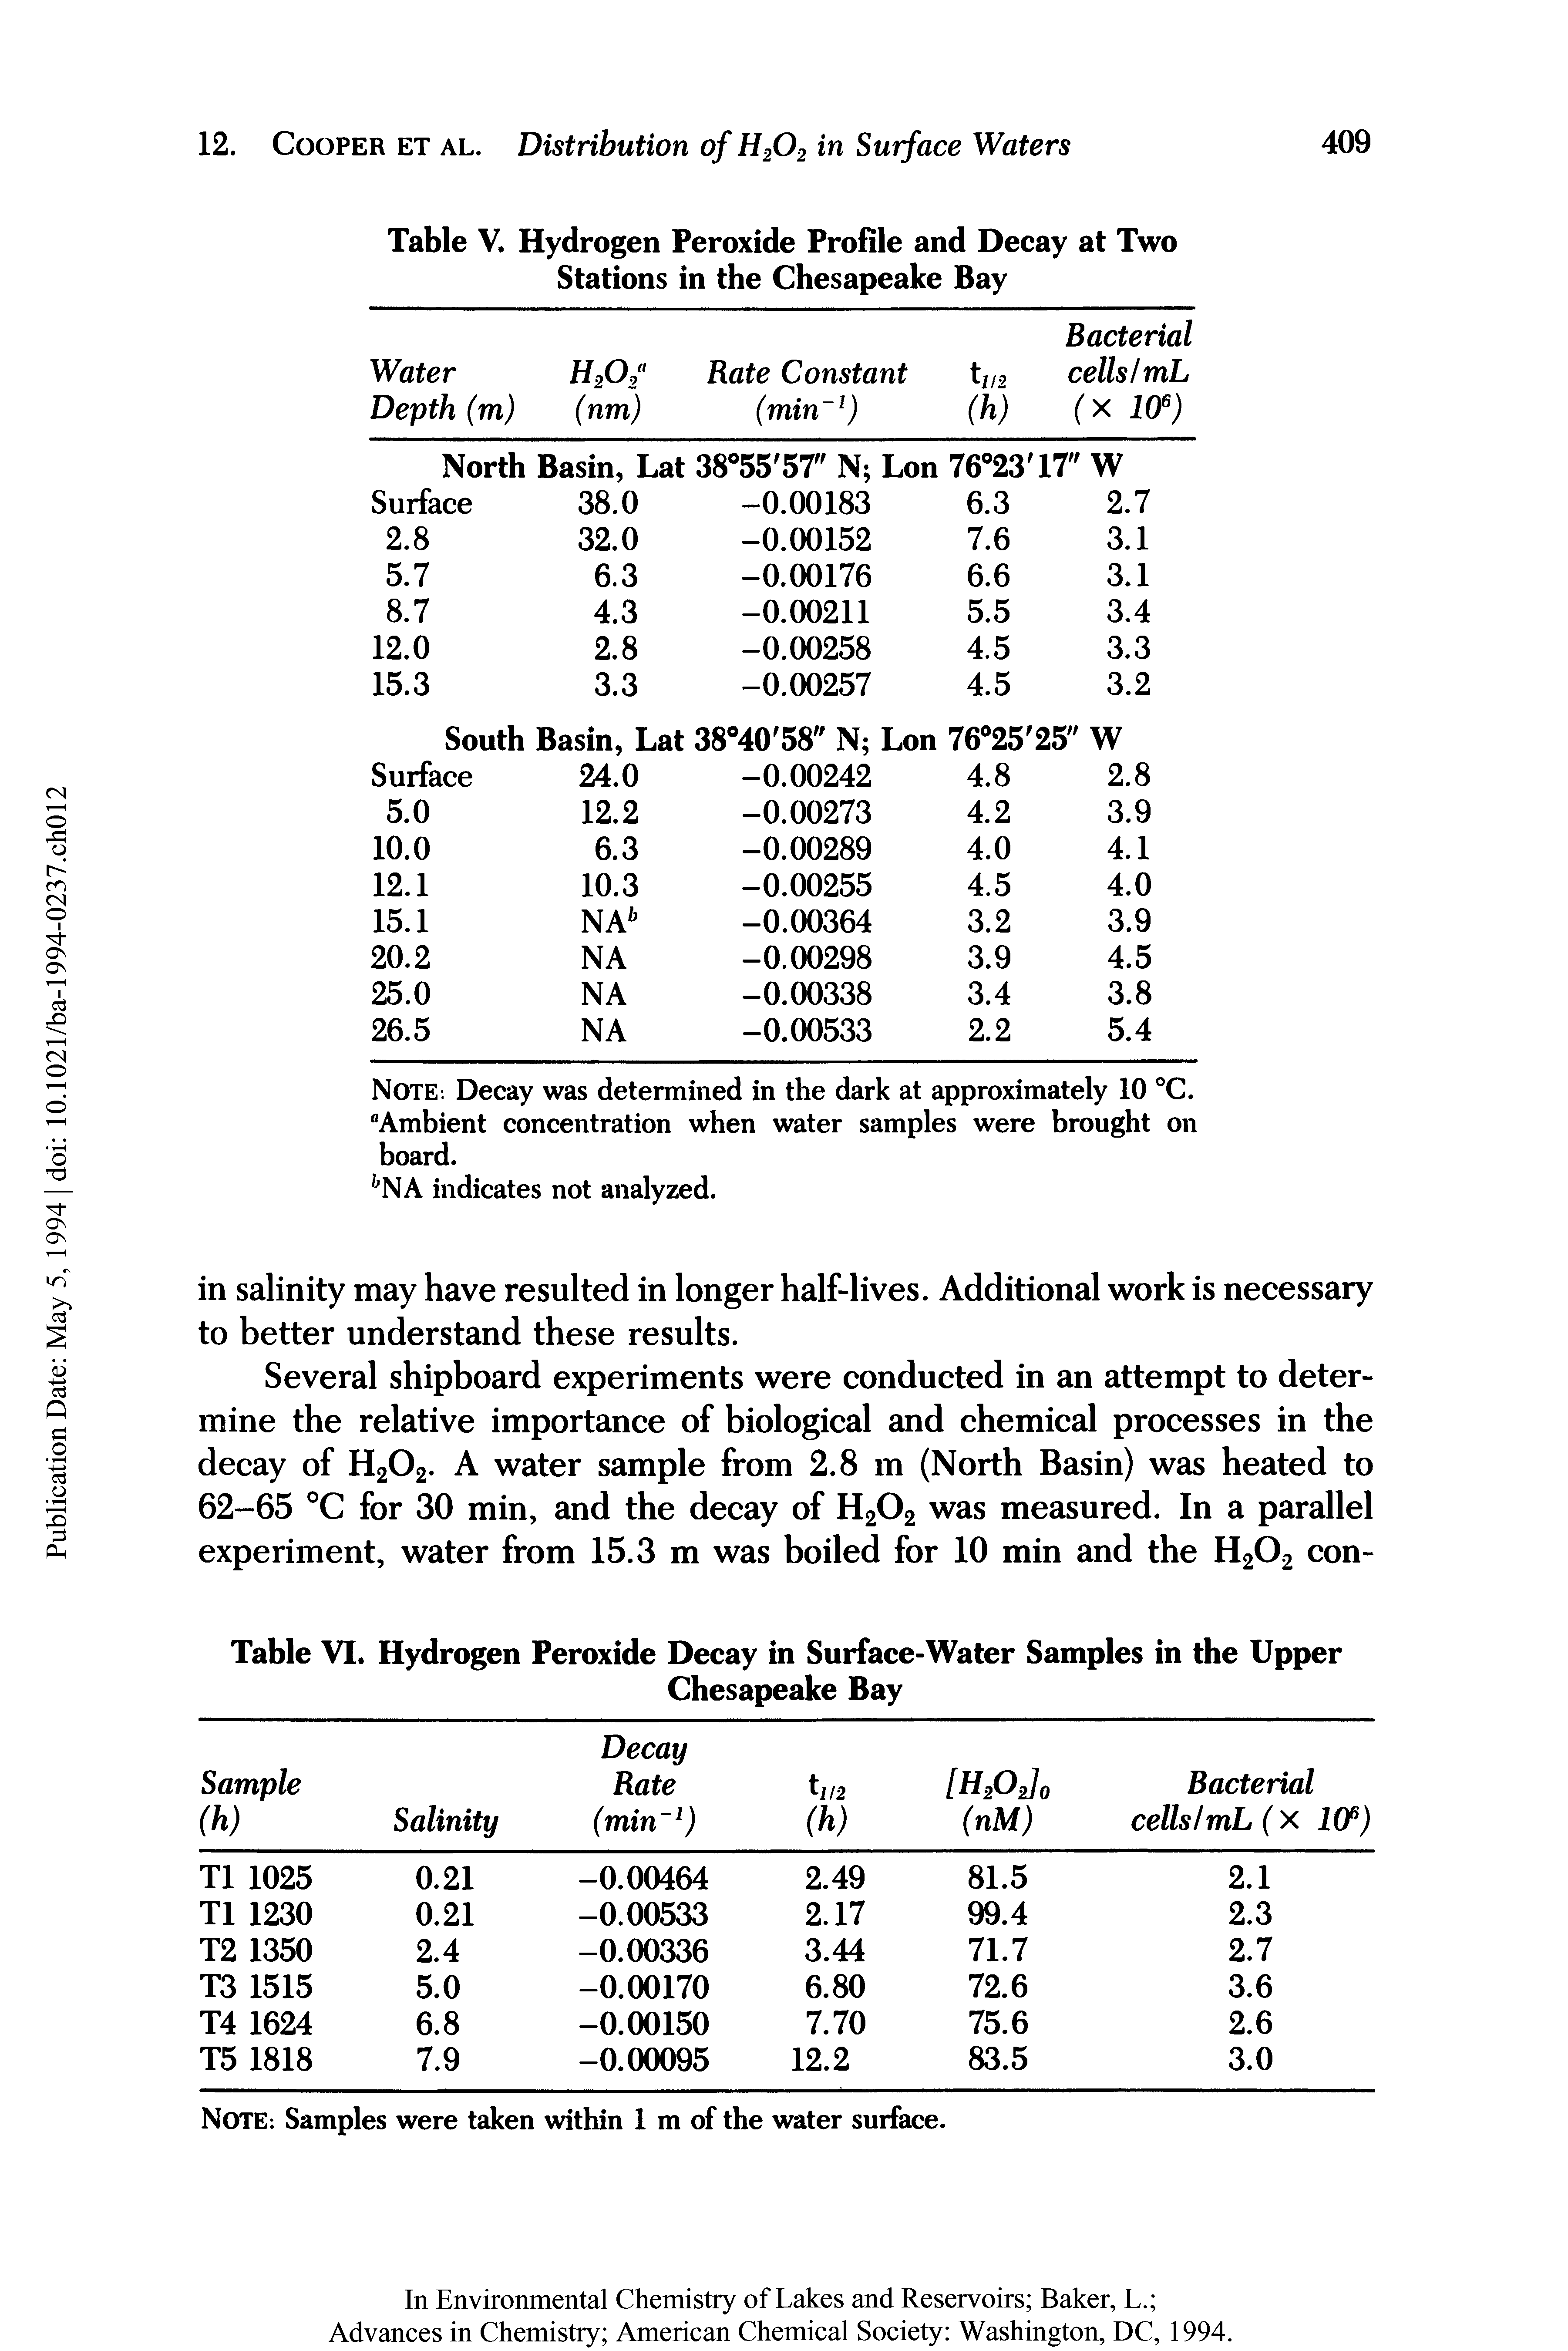 Table VI. Hydrogen Peroxide Decay in Surface-Water Samples in the Upper...